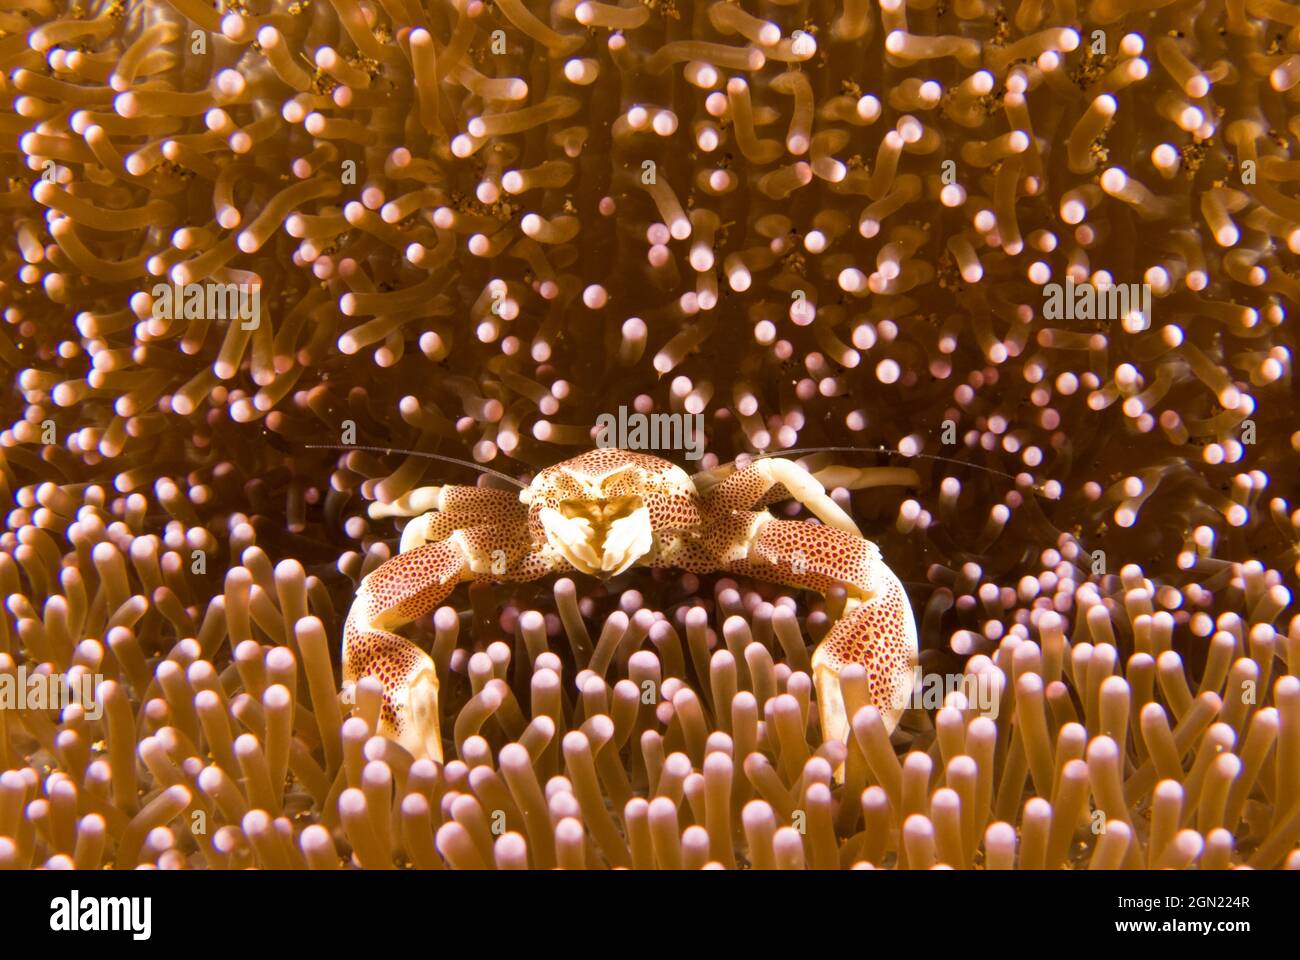 Red-spotted porcelain crab (Neopetrolisthes maculatus), lives in a commensal relationship with anemones. The red spots on a porcelain-like body and th Stock Photo